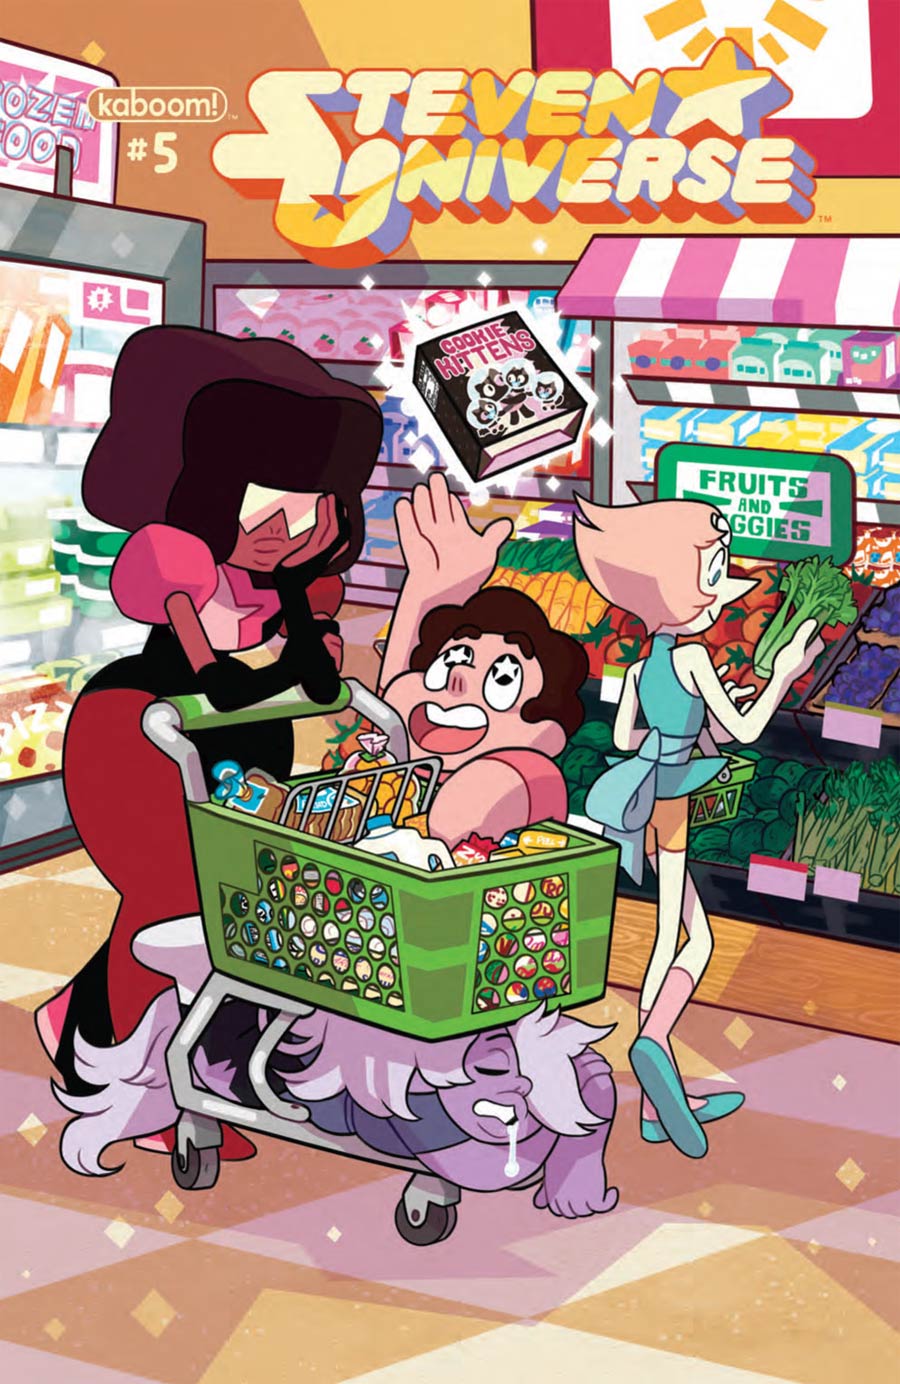 Steven Universe #5 Cover A Regular Amber Rogers Cover